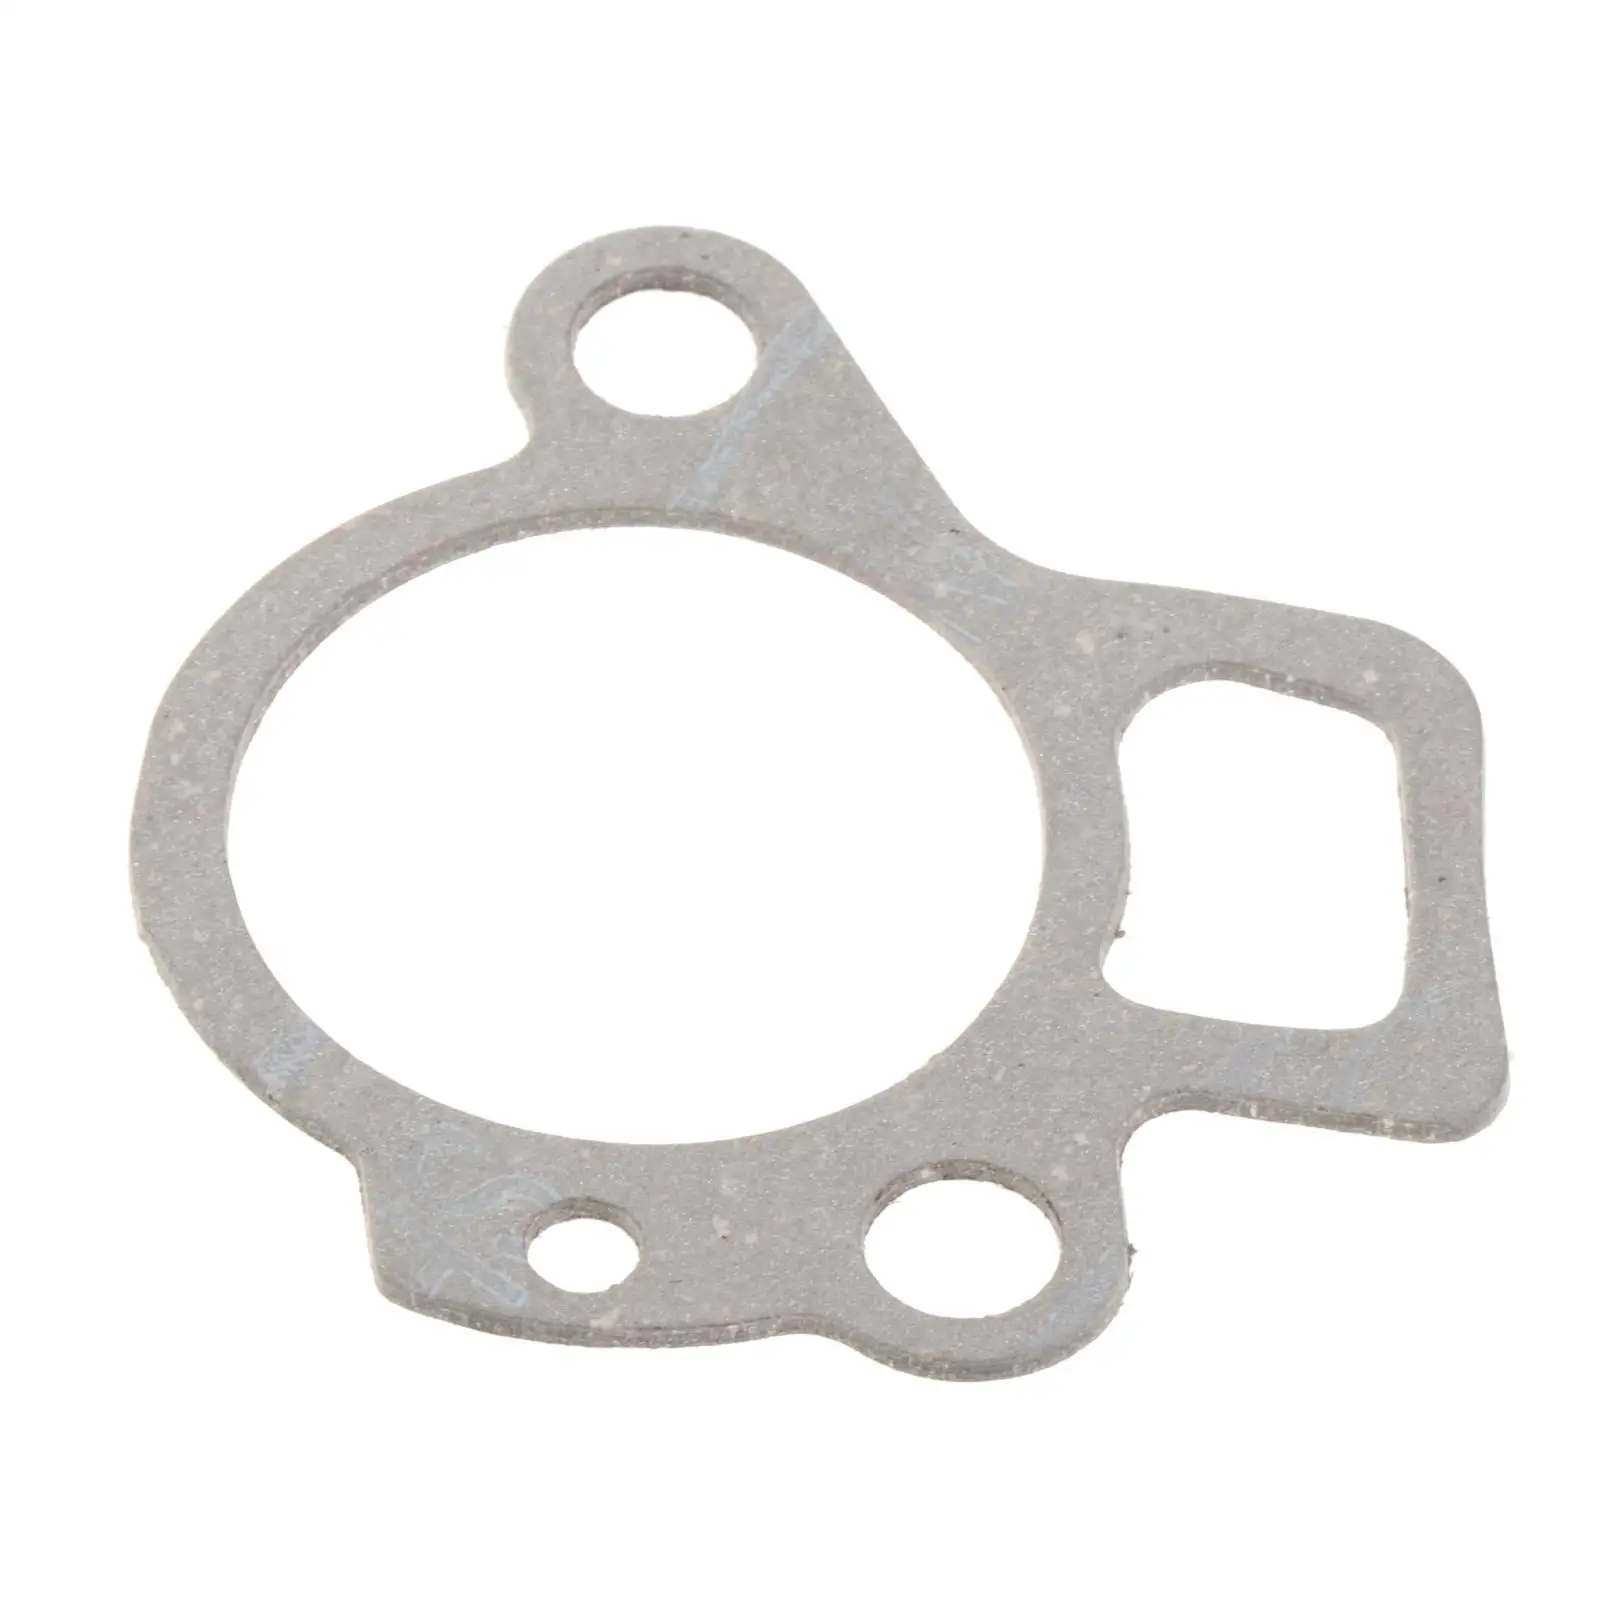 541-25 Thermostat Gasket 6H3-12414-A1 Fit for Yamaha Outboard Engine 9.9-70 HP Accessories High Performance High Reliability